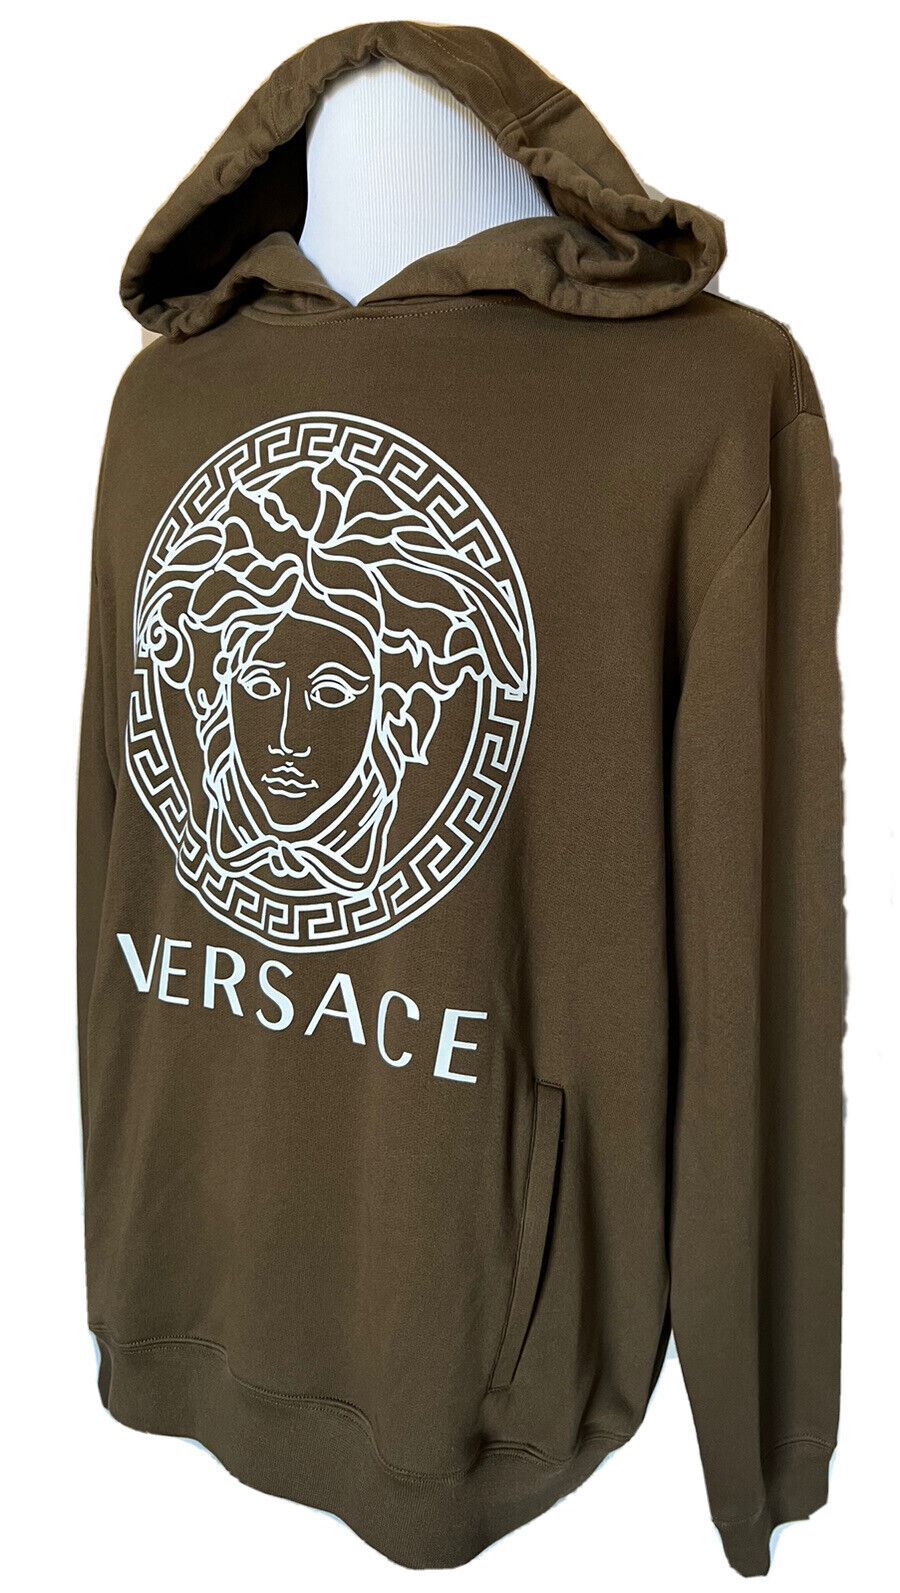 NWT $750 Versace Medusa Print Olive Cotton Sweatshirt with Hoodie 4XL A89514S IT